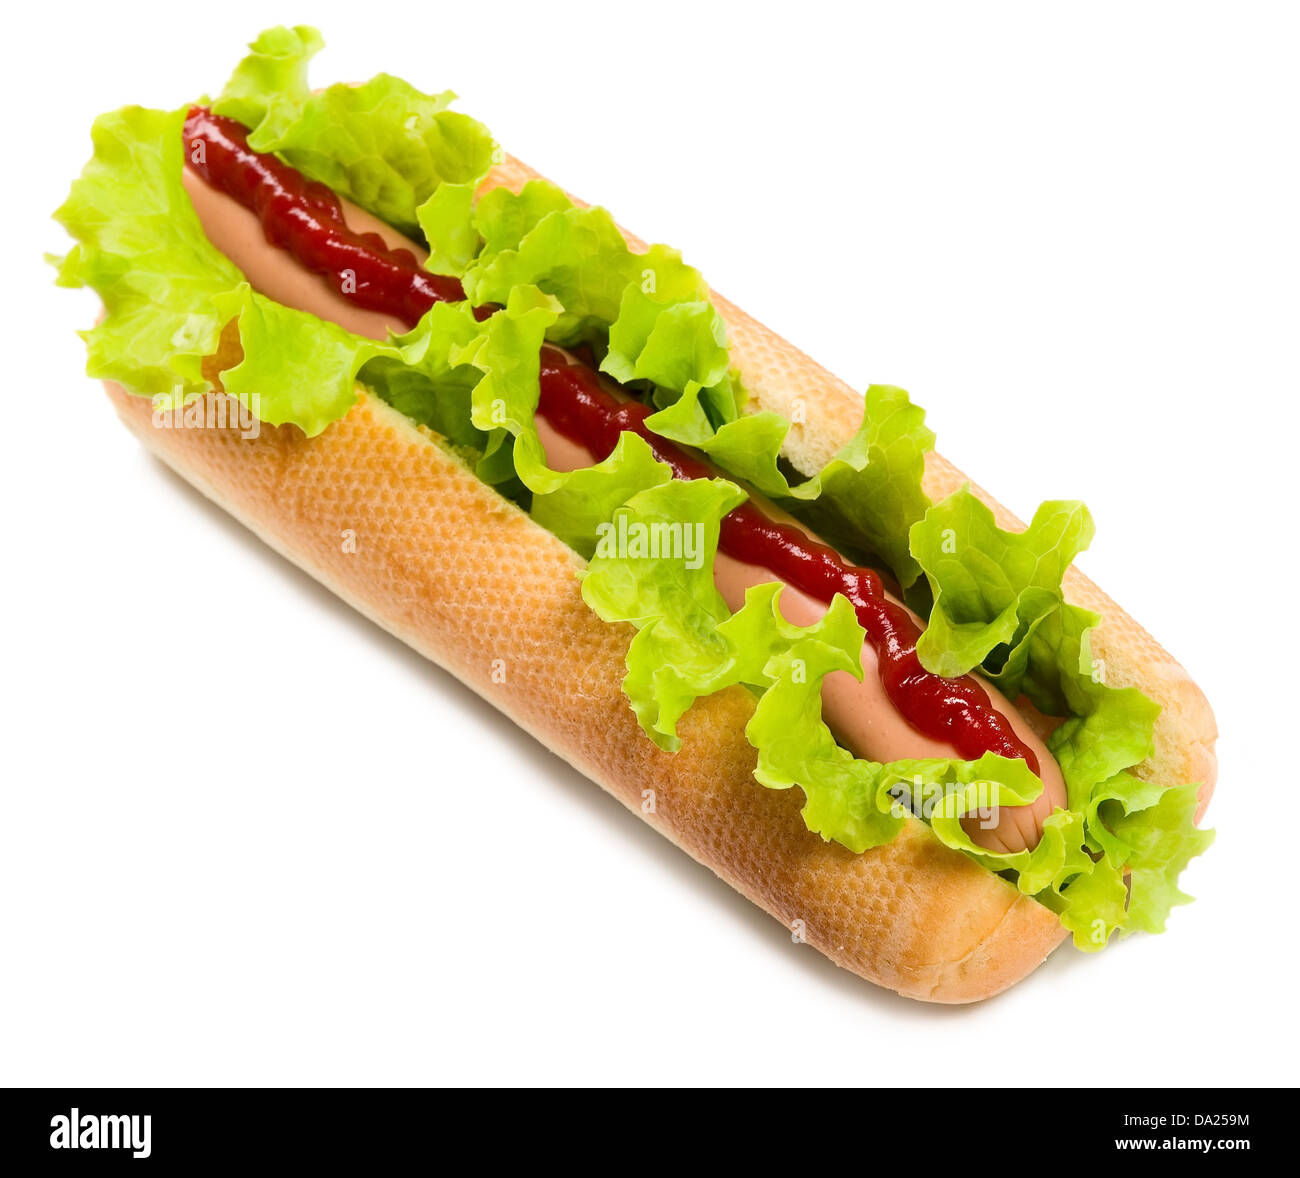 It is hot dog on isolated background, food concept Stock Photo